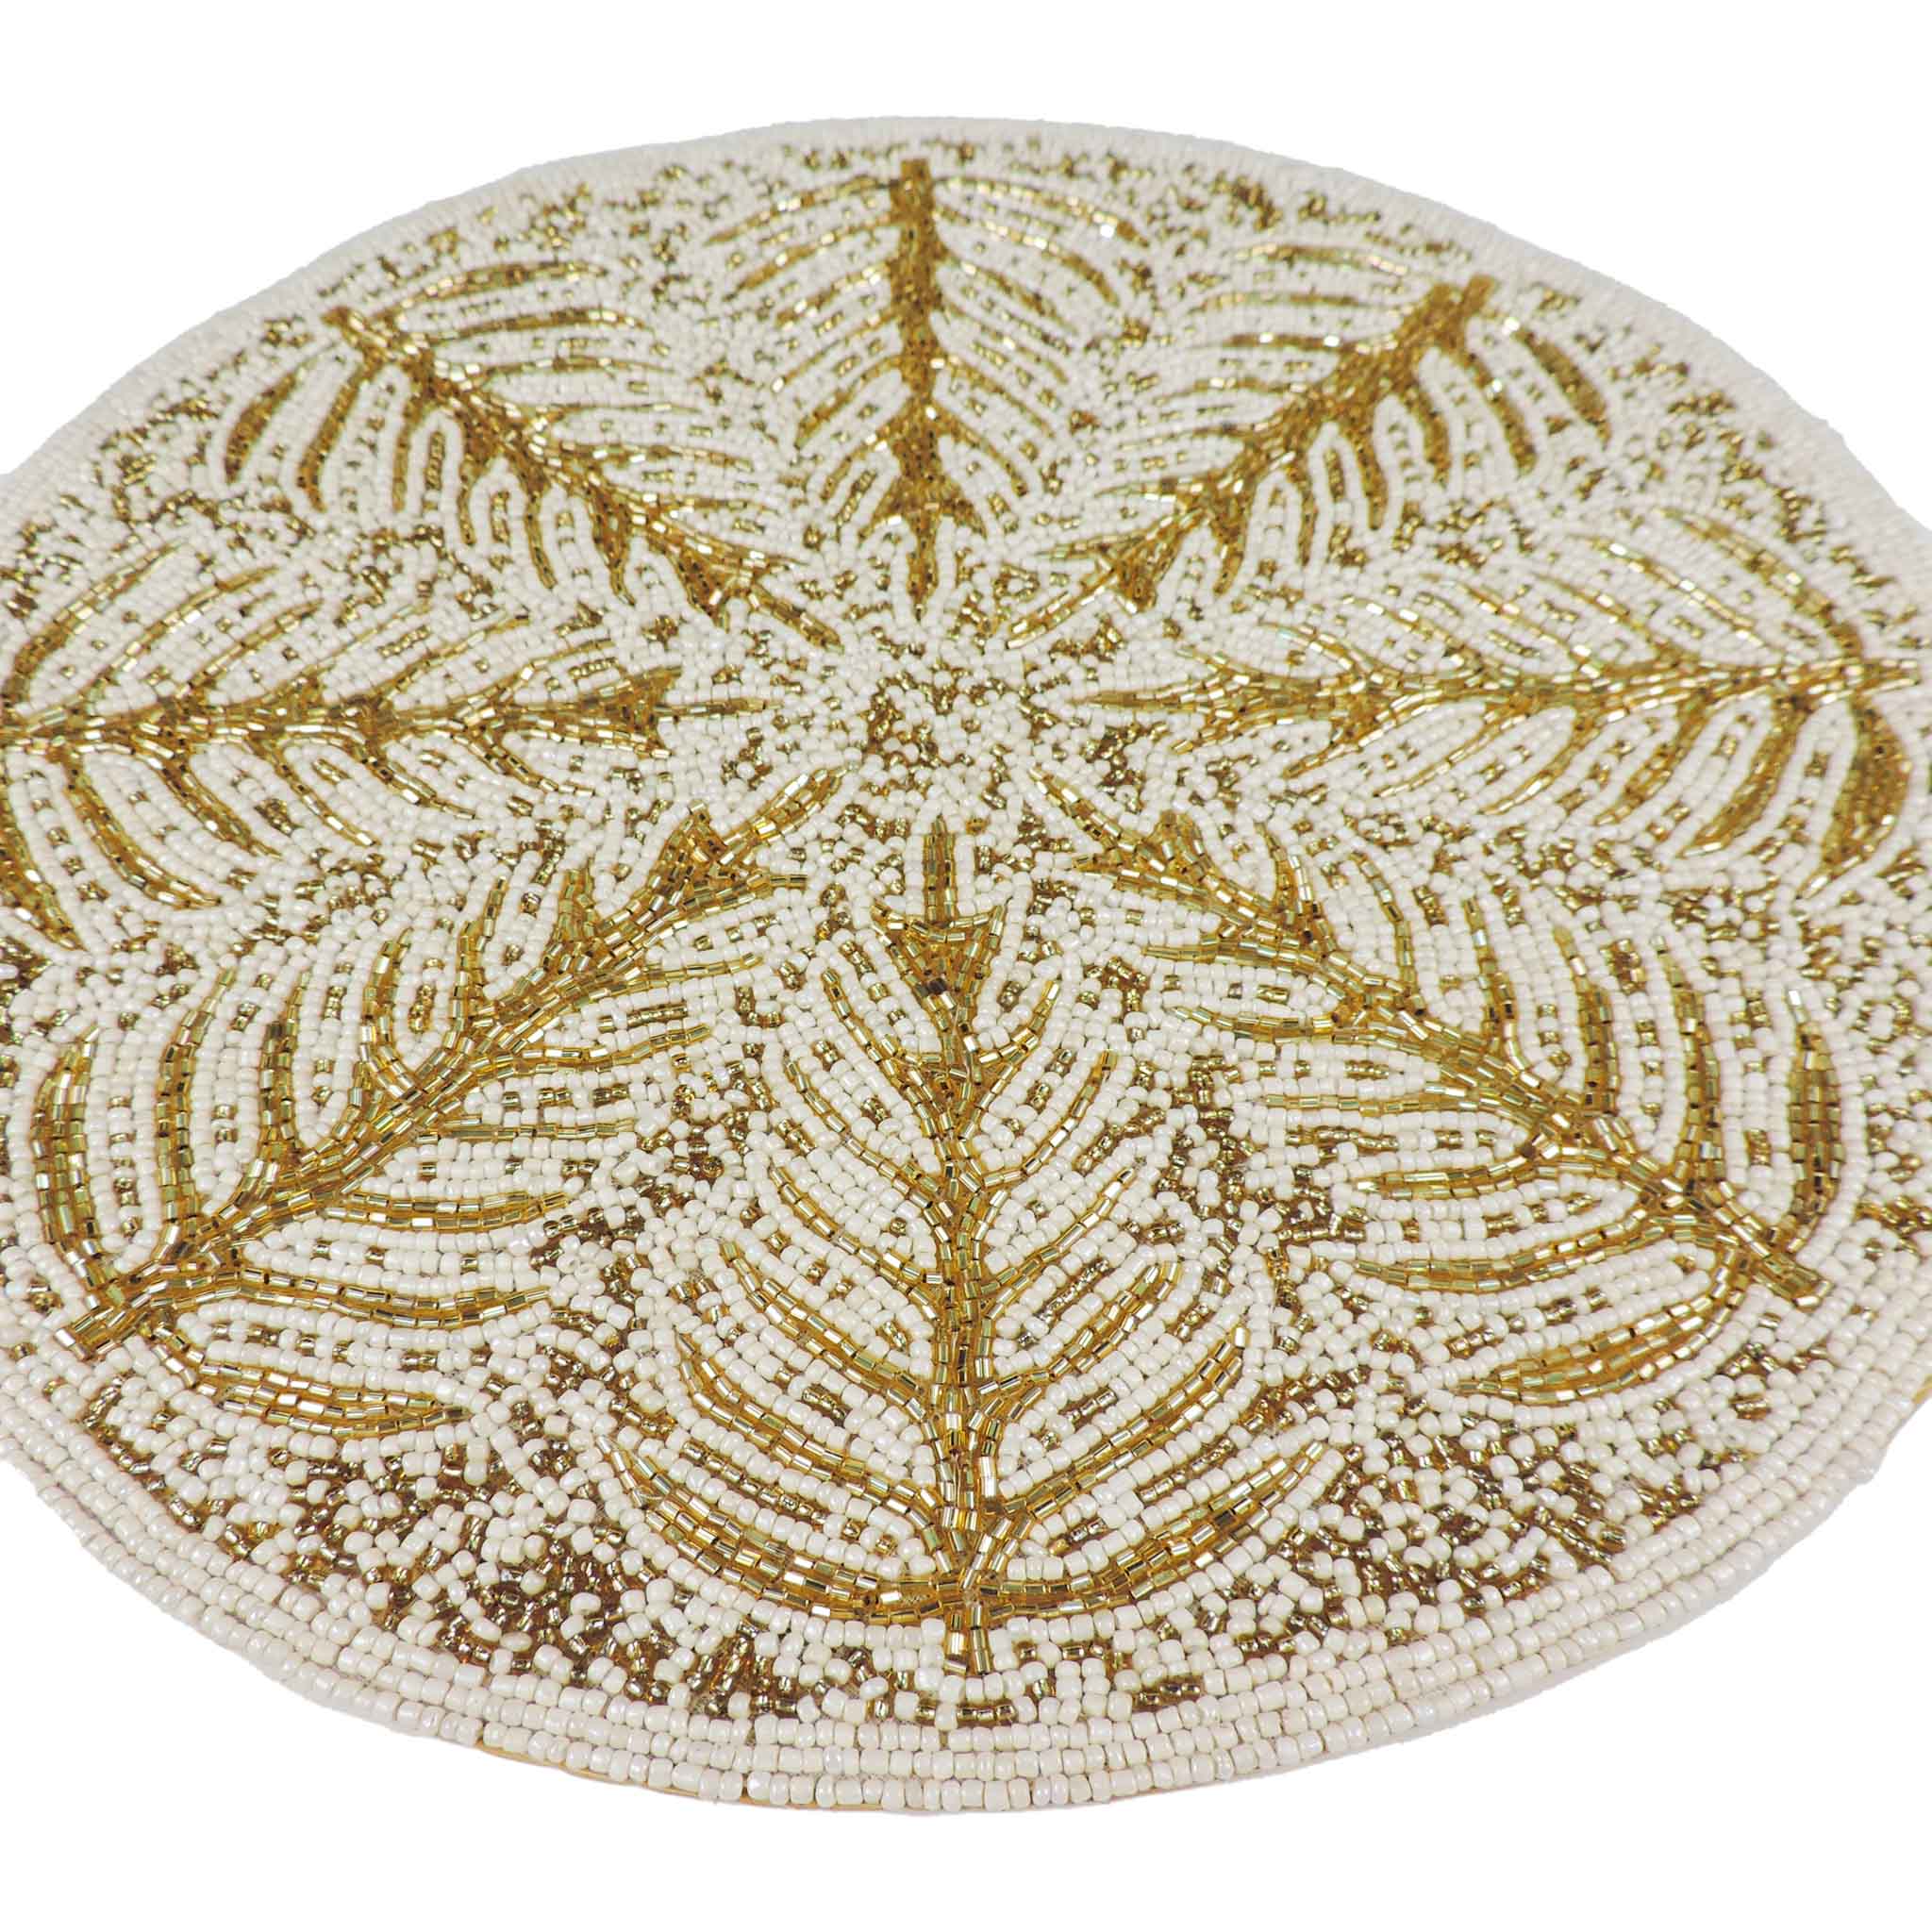 Tree of Life Glass Bead Embroidered Placemat in Cream & Gold, Set of 2